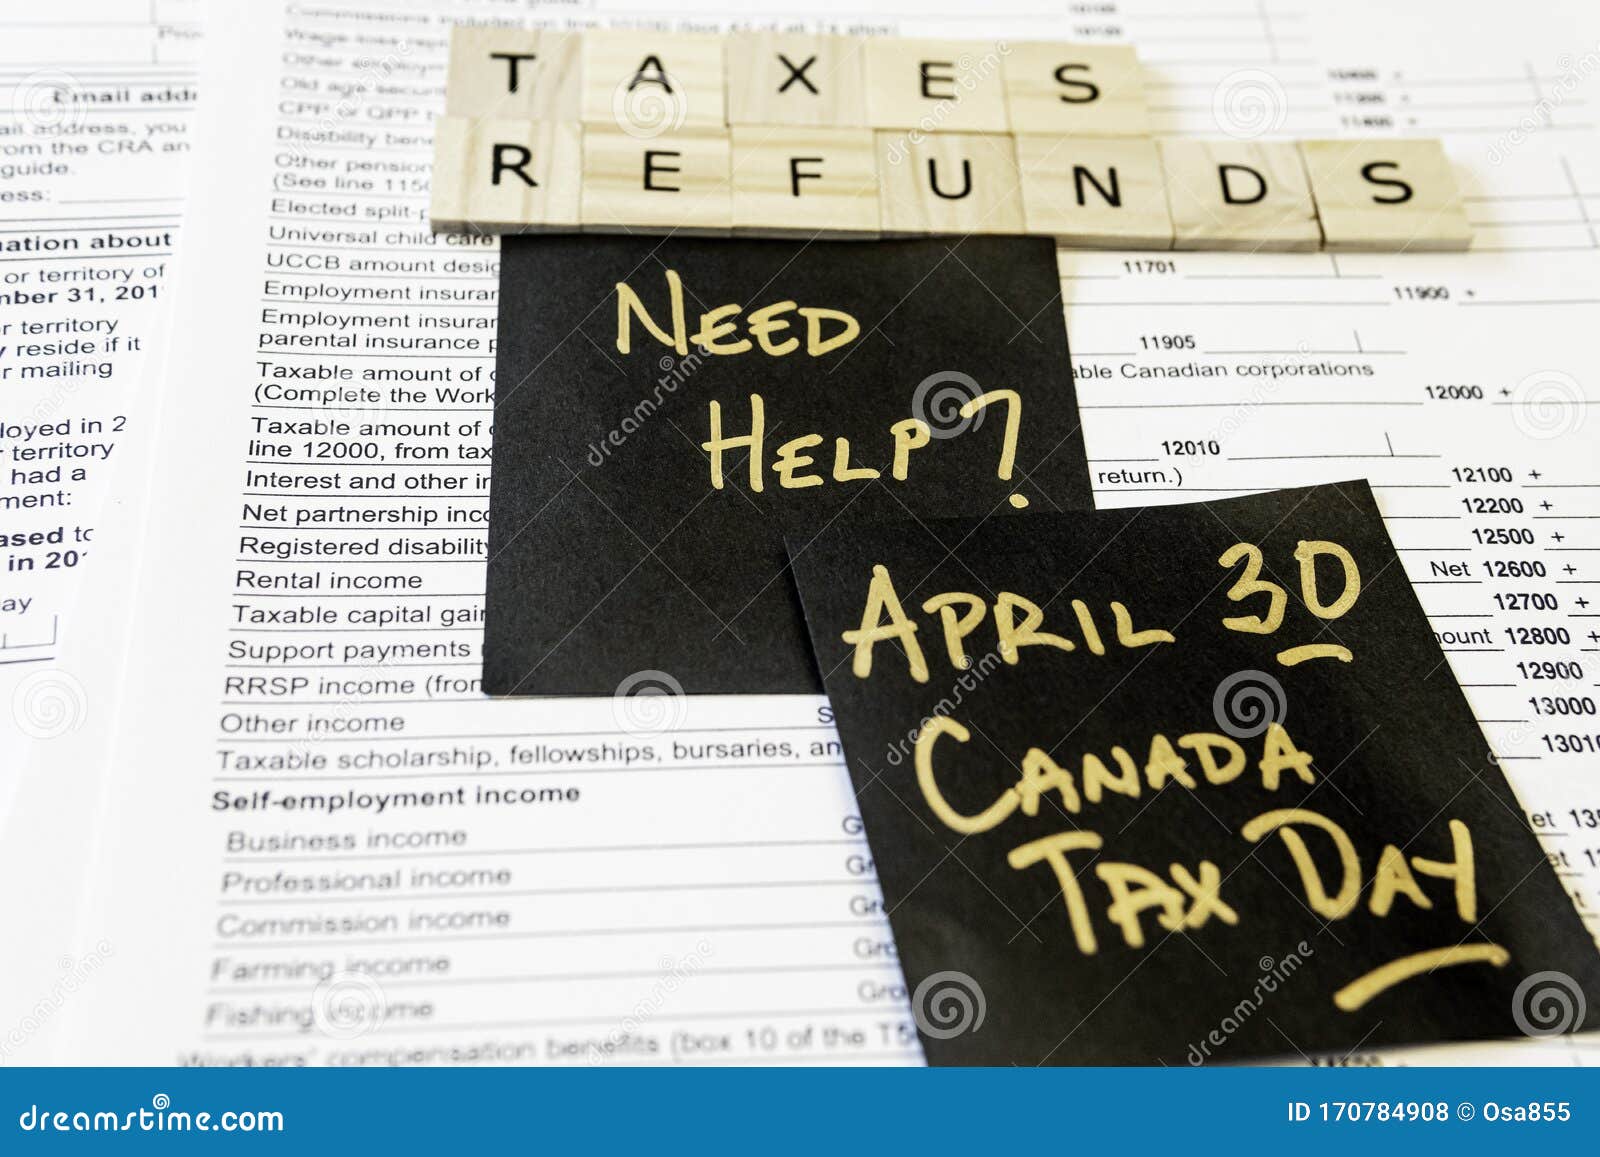 new-canadian-personal-tax-forms-and-letter-tiles-showing-refunds-and